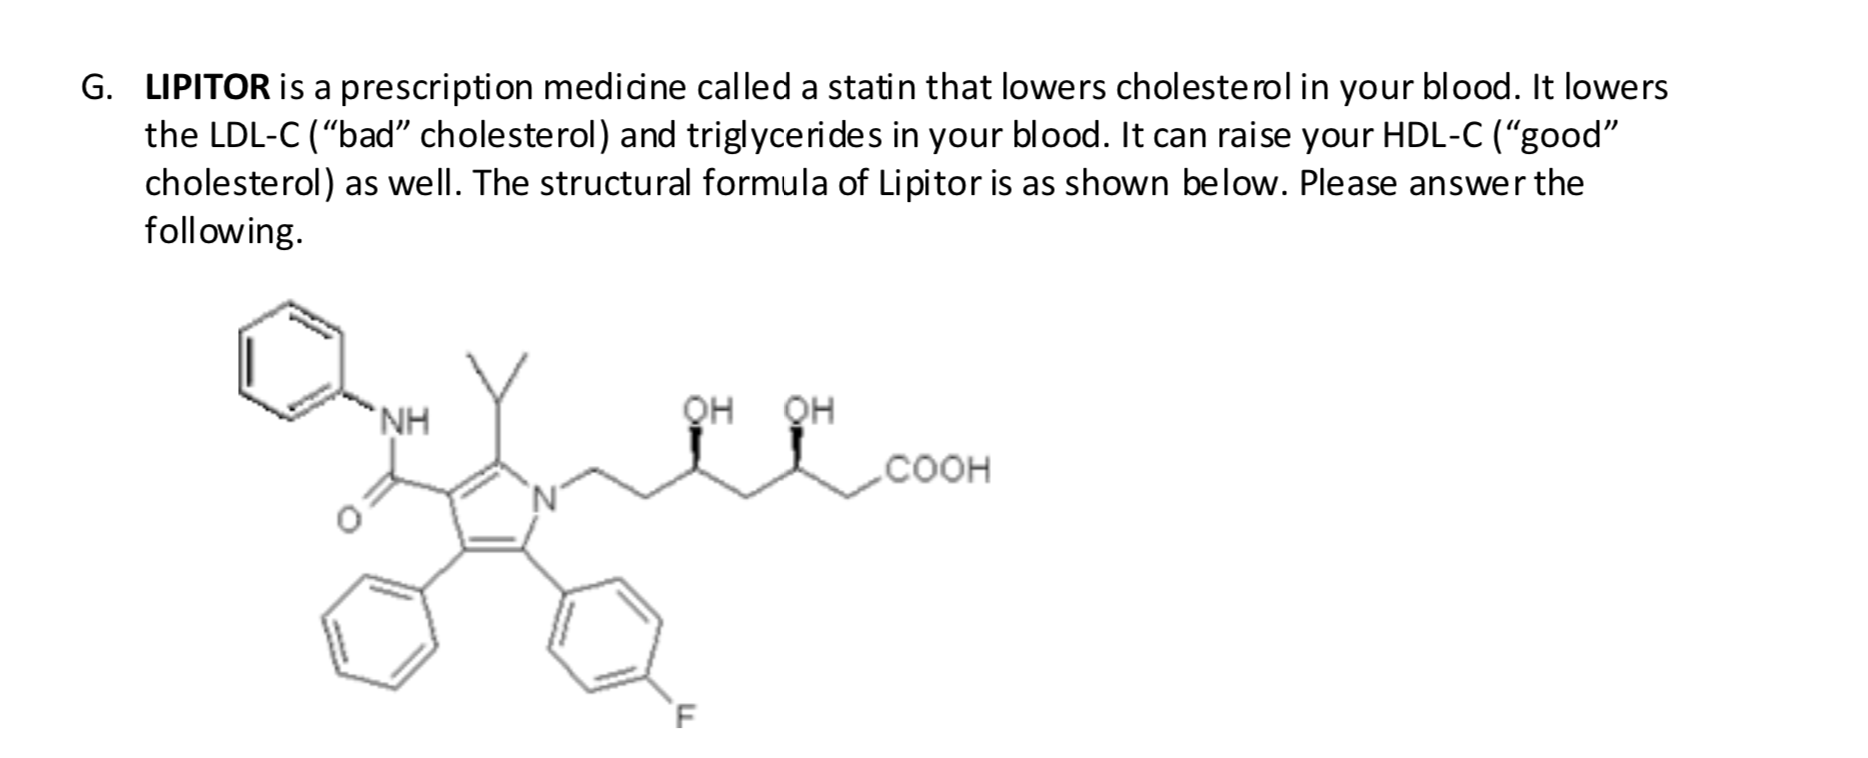 G. LIPITOR is a prescription medidne called a statin that lowers cholesterol in your blood. It lowers
the LDL-C (“bad" cholesterol) and triglycerides in your blood. It can raise your HDL-C (“good"
cholesterol) as well. The structural formula of Lipitor is as shown below. Please answer the
following.
`NH
QH
QH
соон
`F
